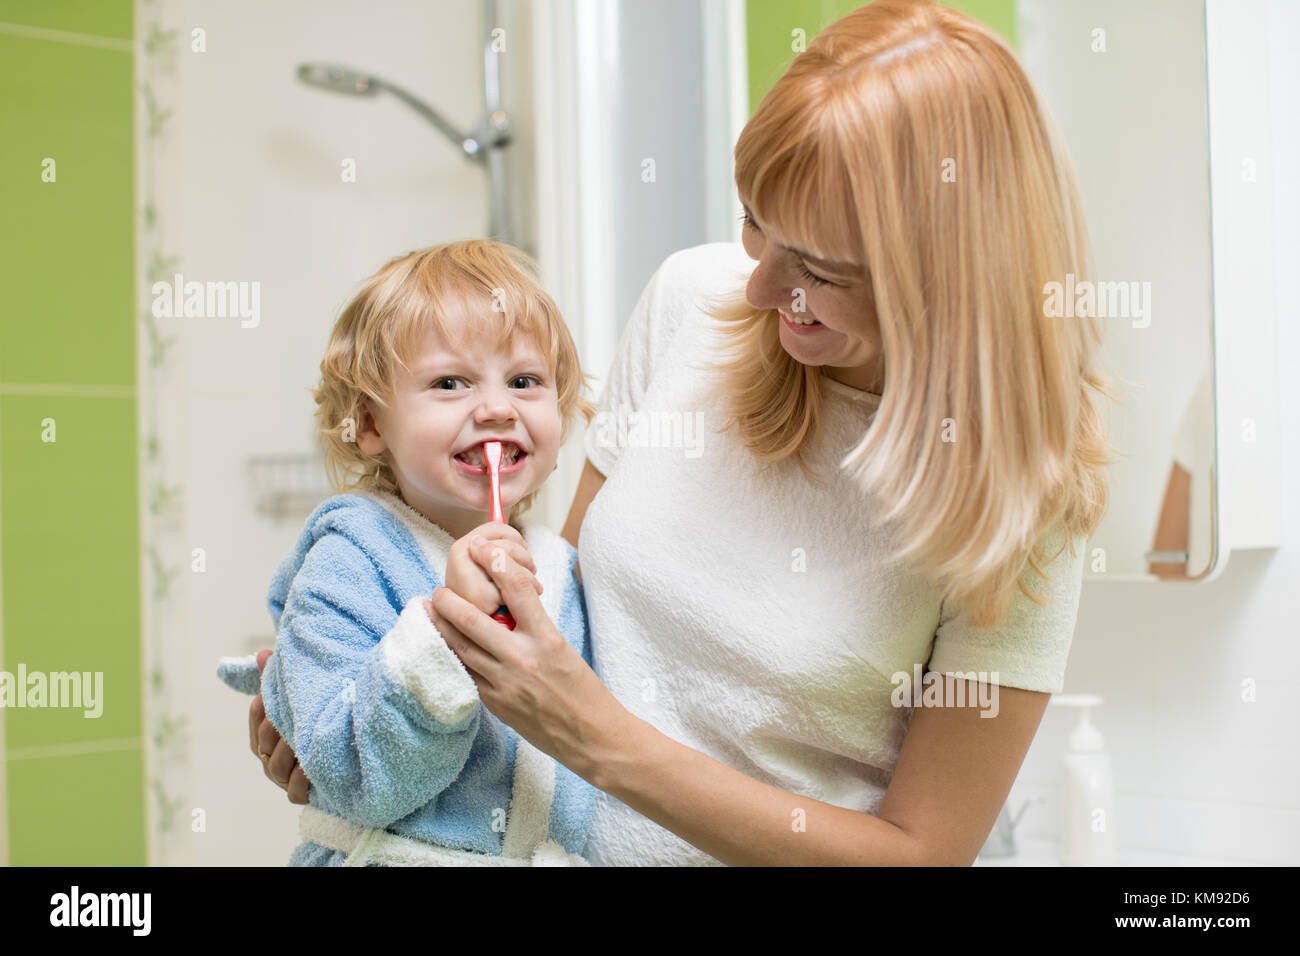 Child oral care. Mom is helping kid brush his teeth. Stock Photo